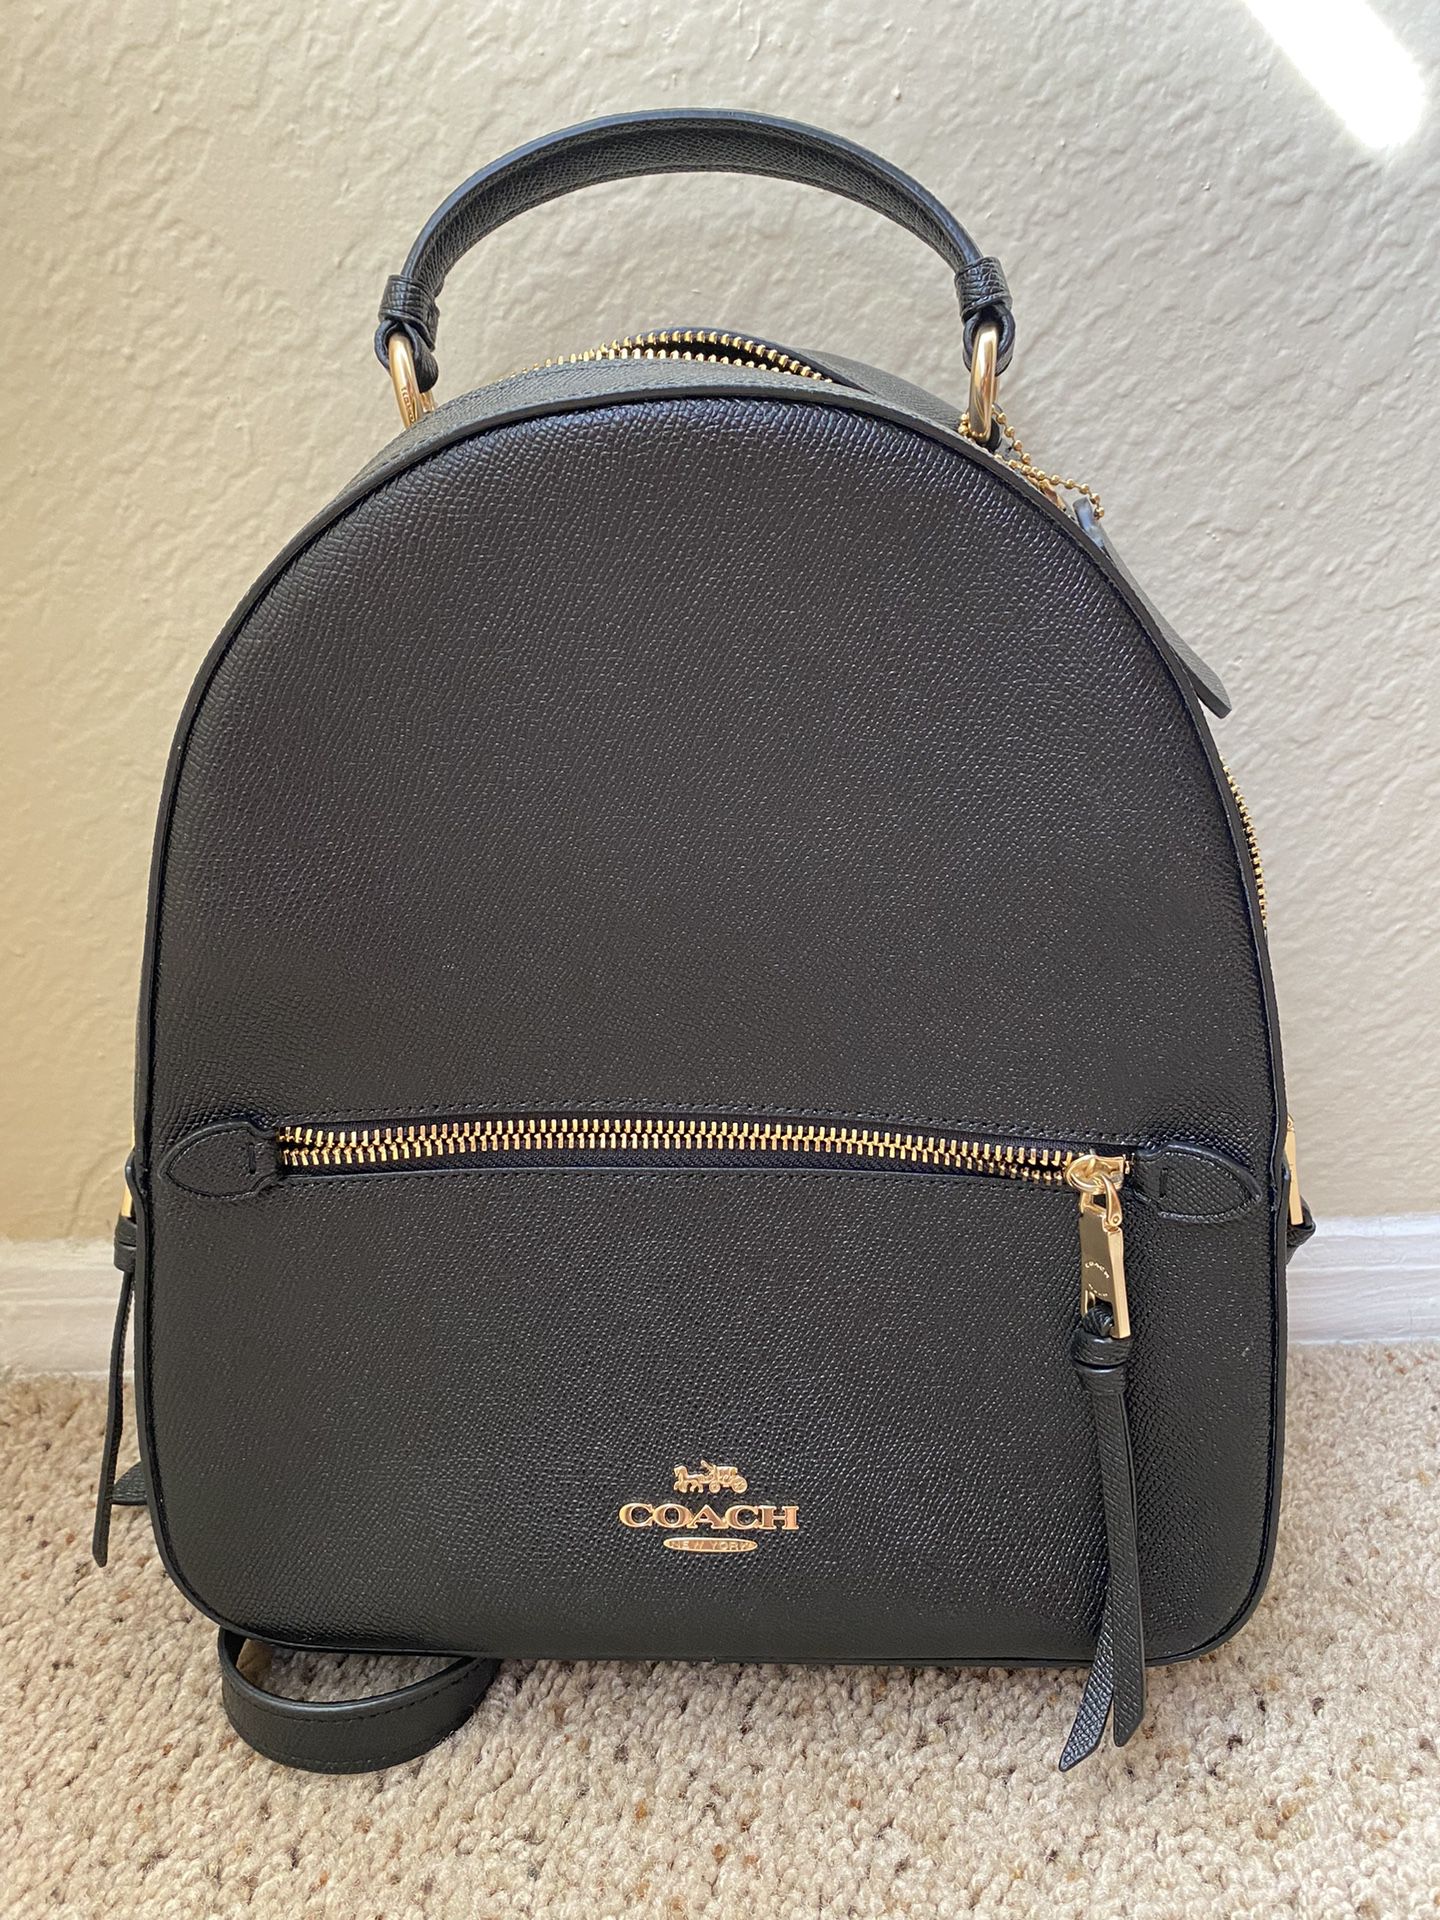 Coach Purse (Backpack Style)